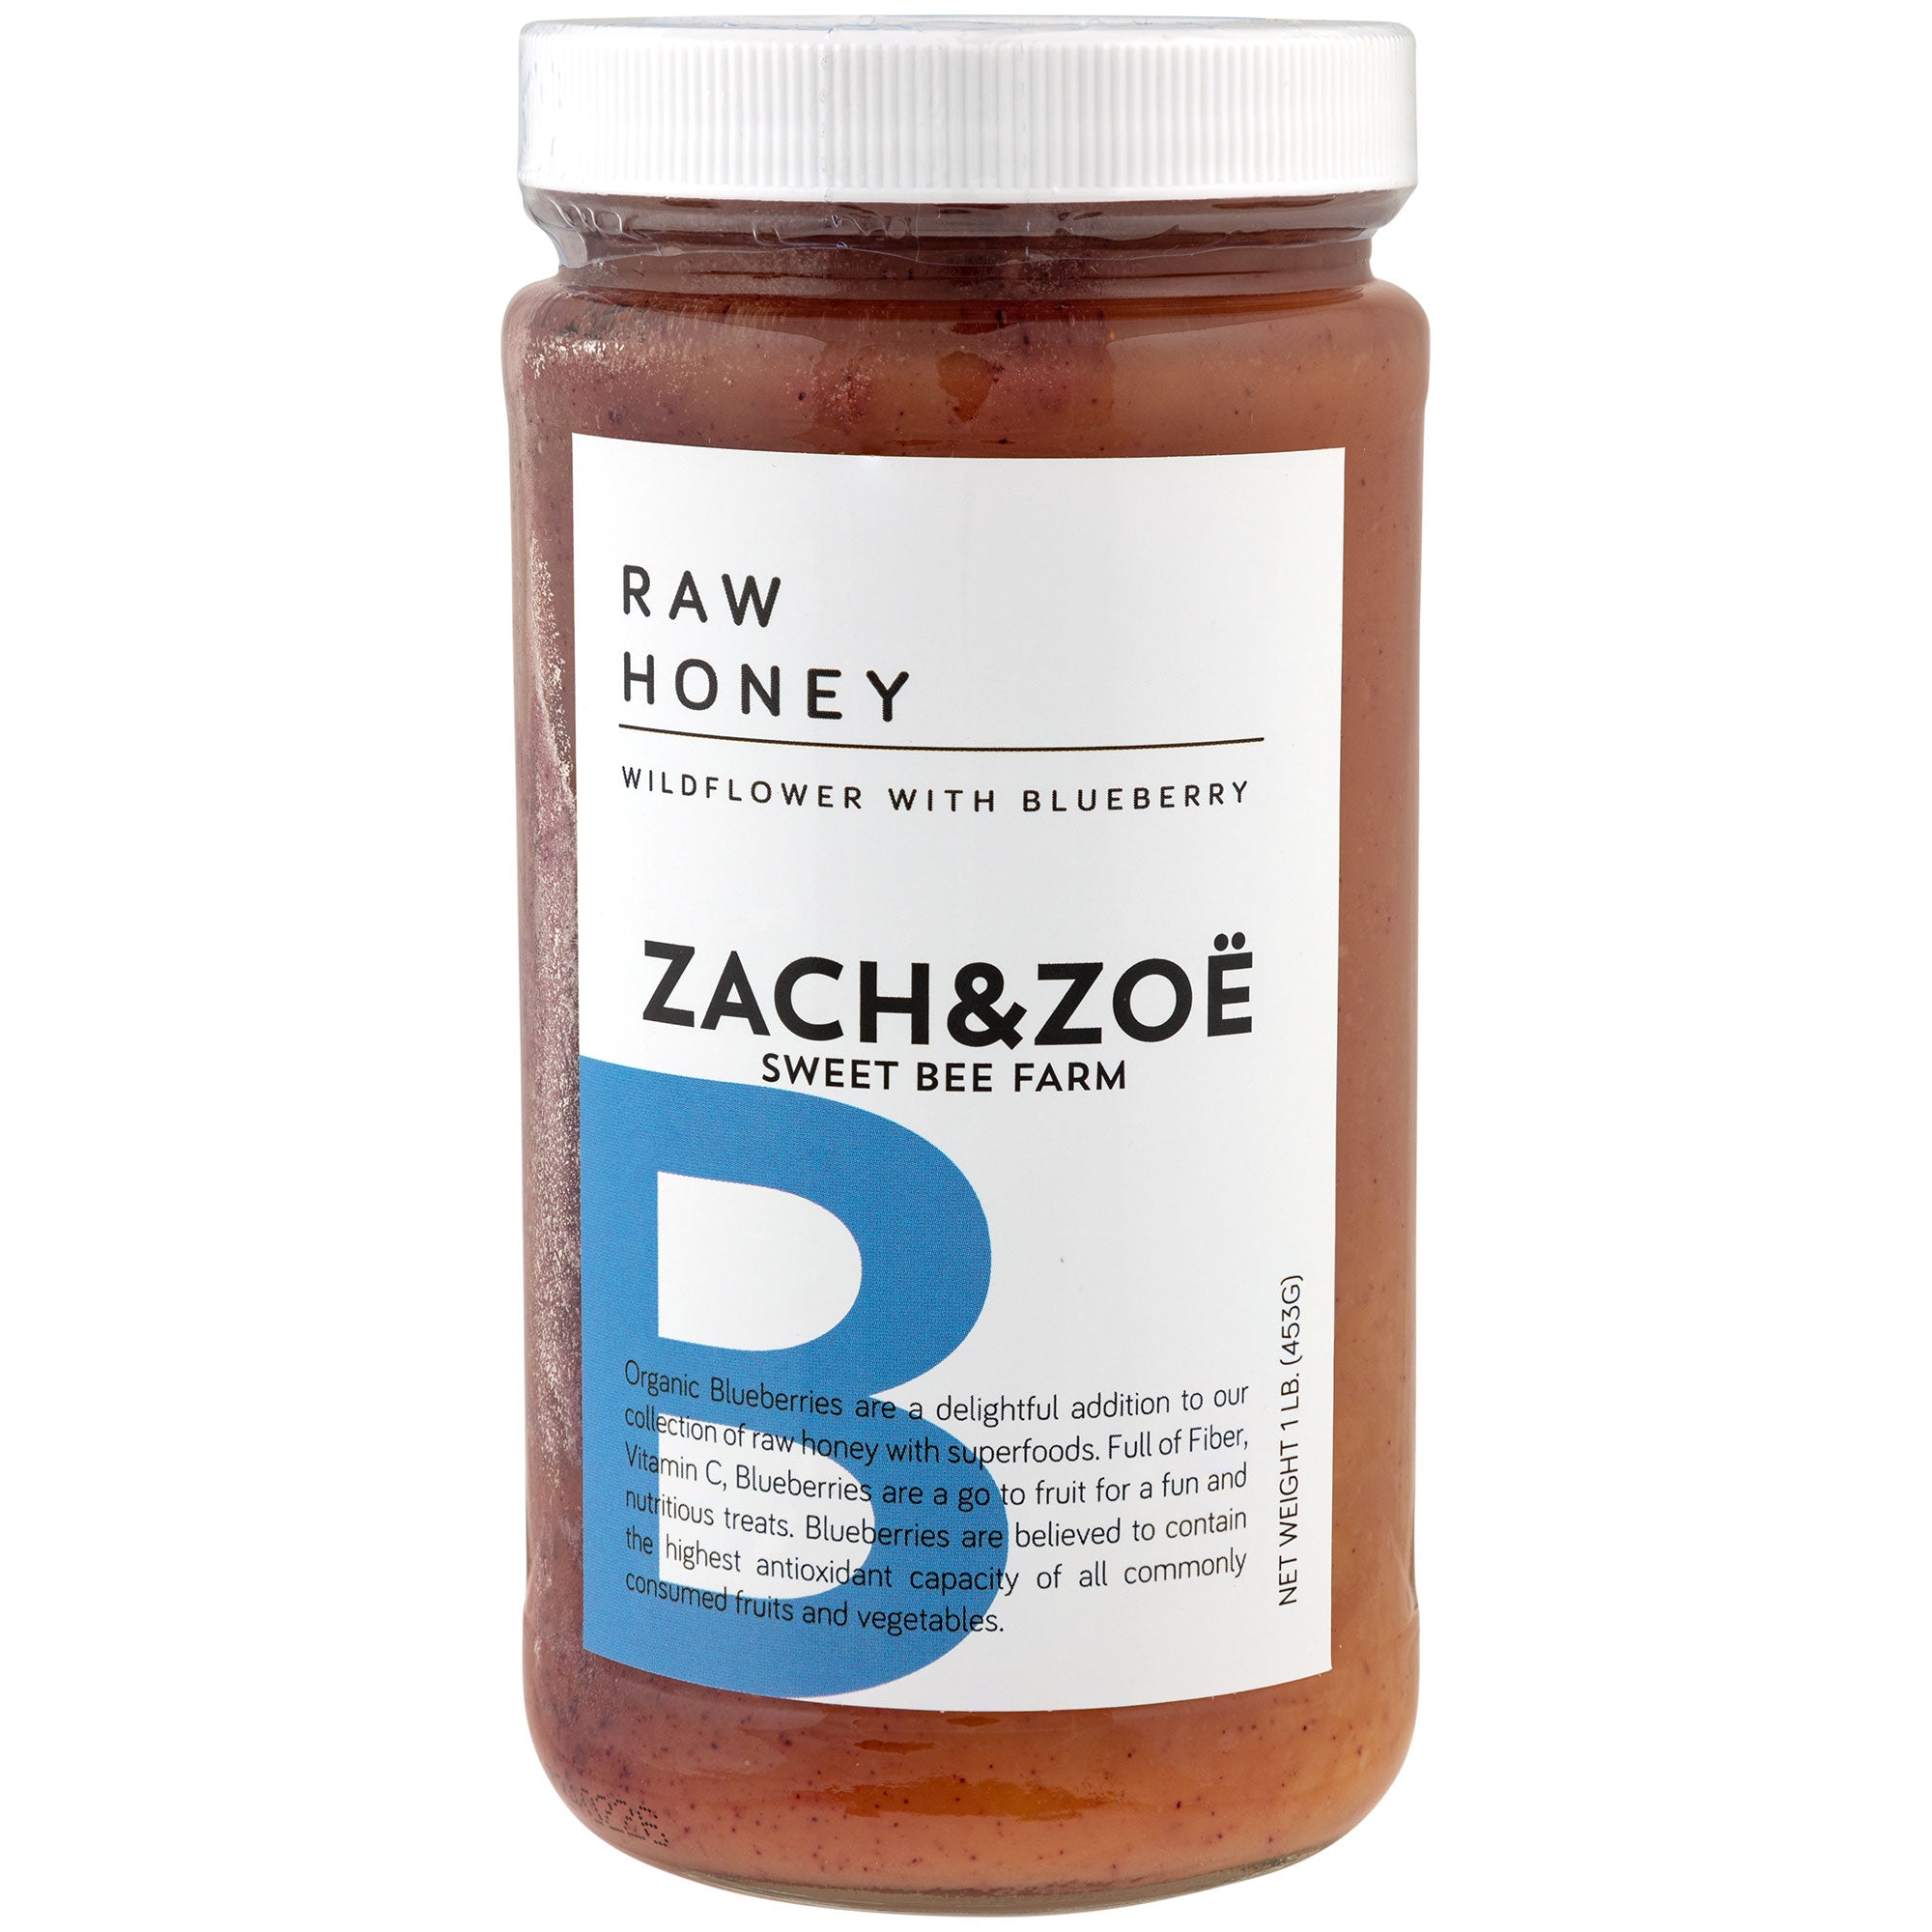 Zach And Zoe Sweet Bee Farm Raw Unfiltered Honey - 16 Oz. - Wildflower With Blueberry